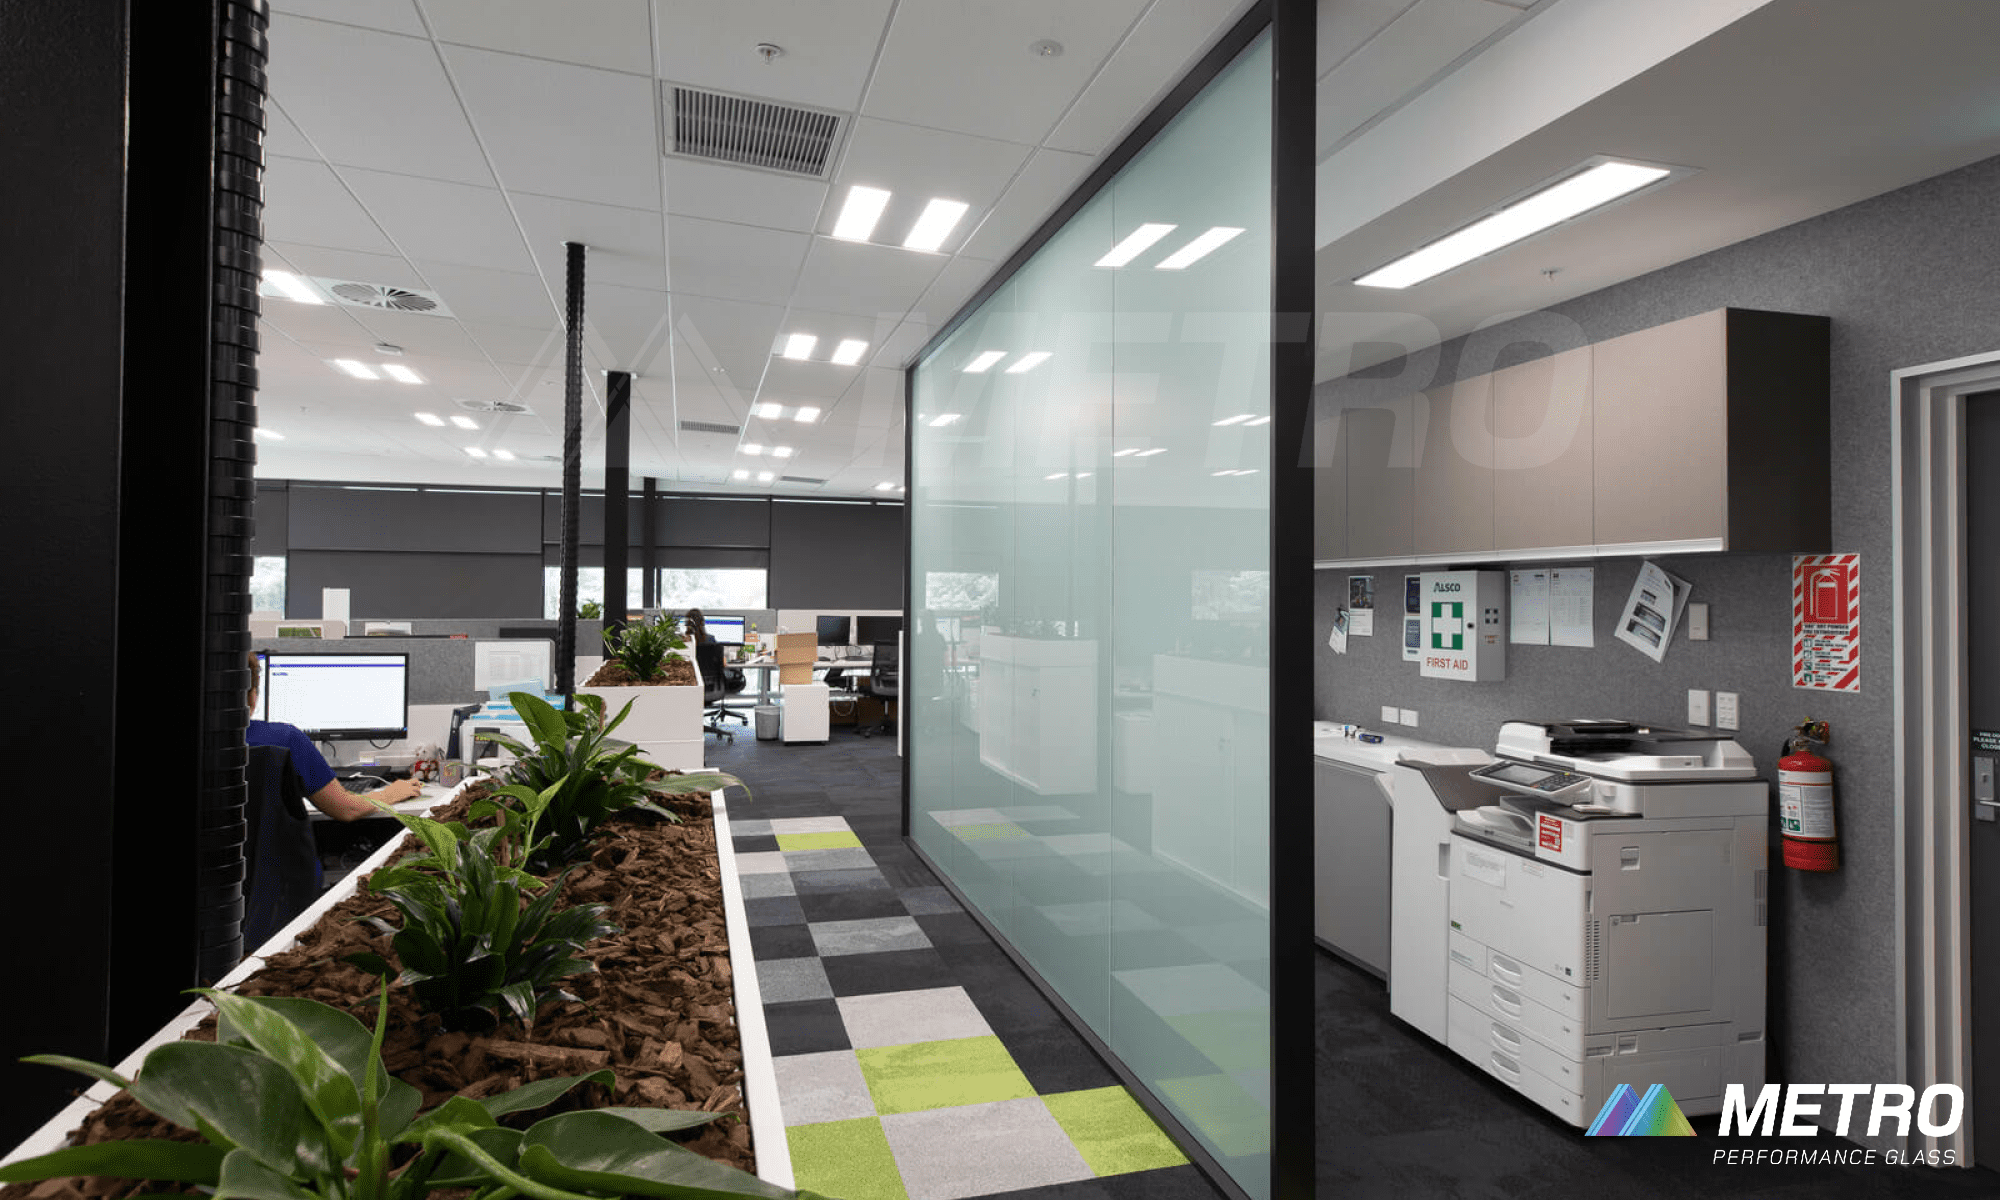 Commercial office space with frosted glass partition and patterned flooring